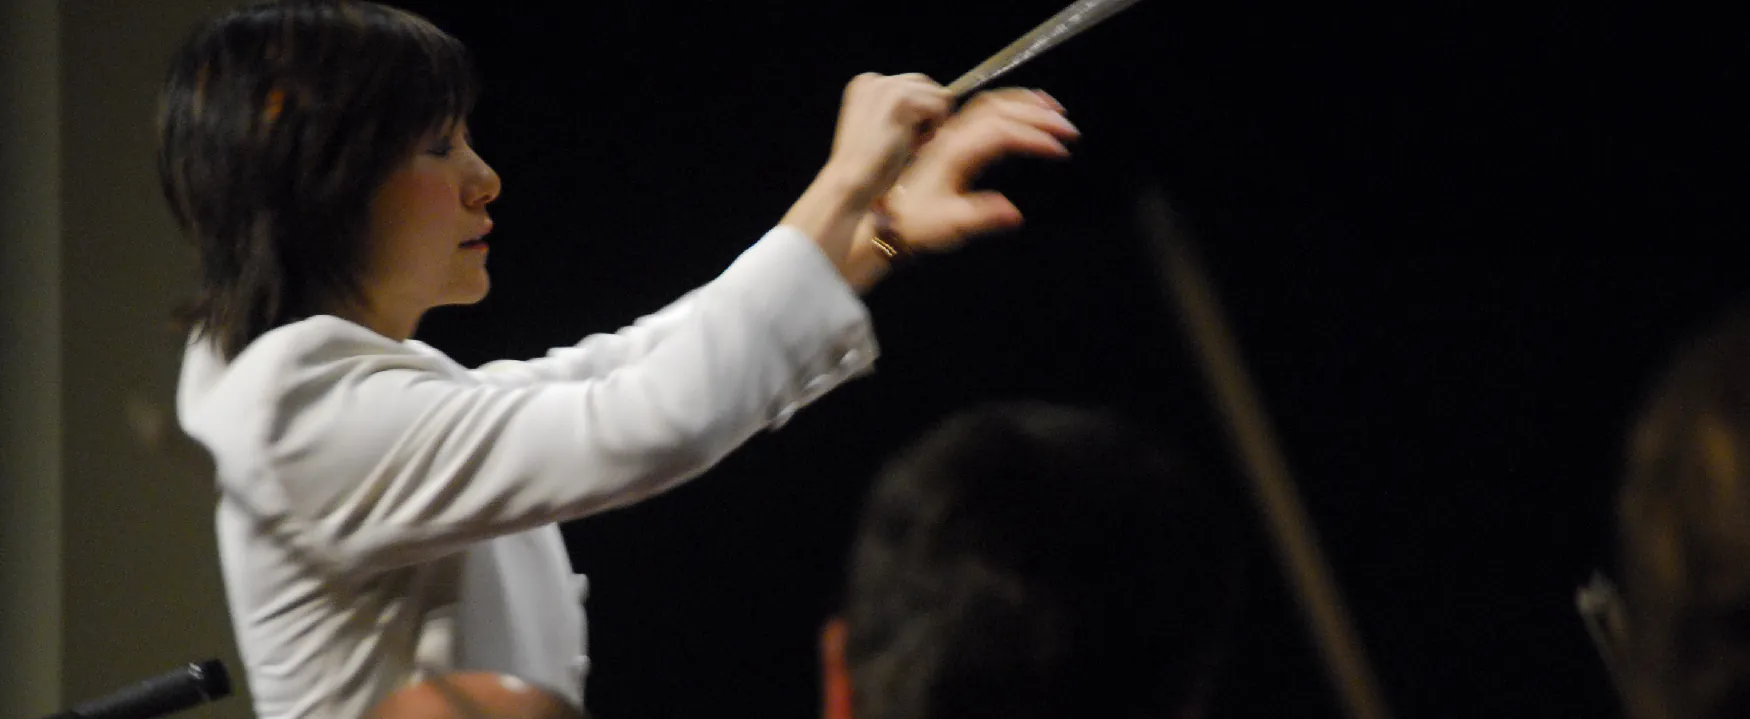 A photo shows the side view of a female orchestra conductor directing her orchestra.